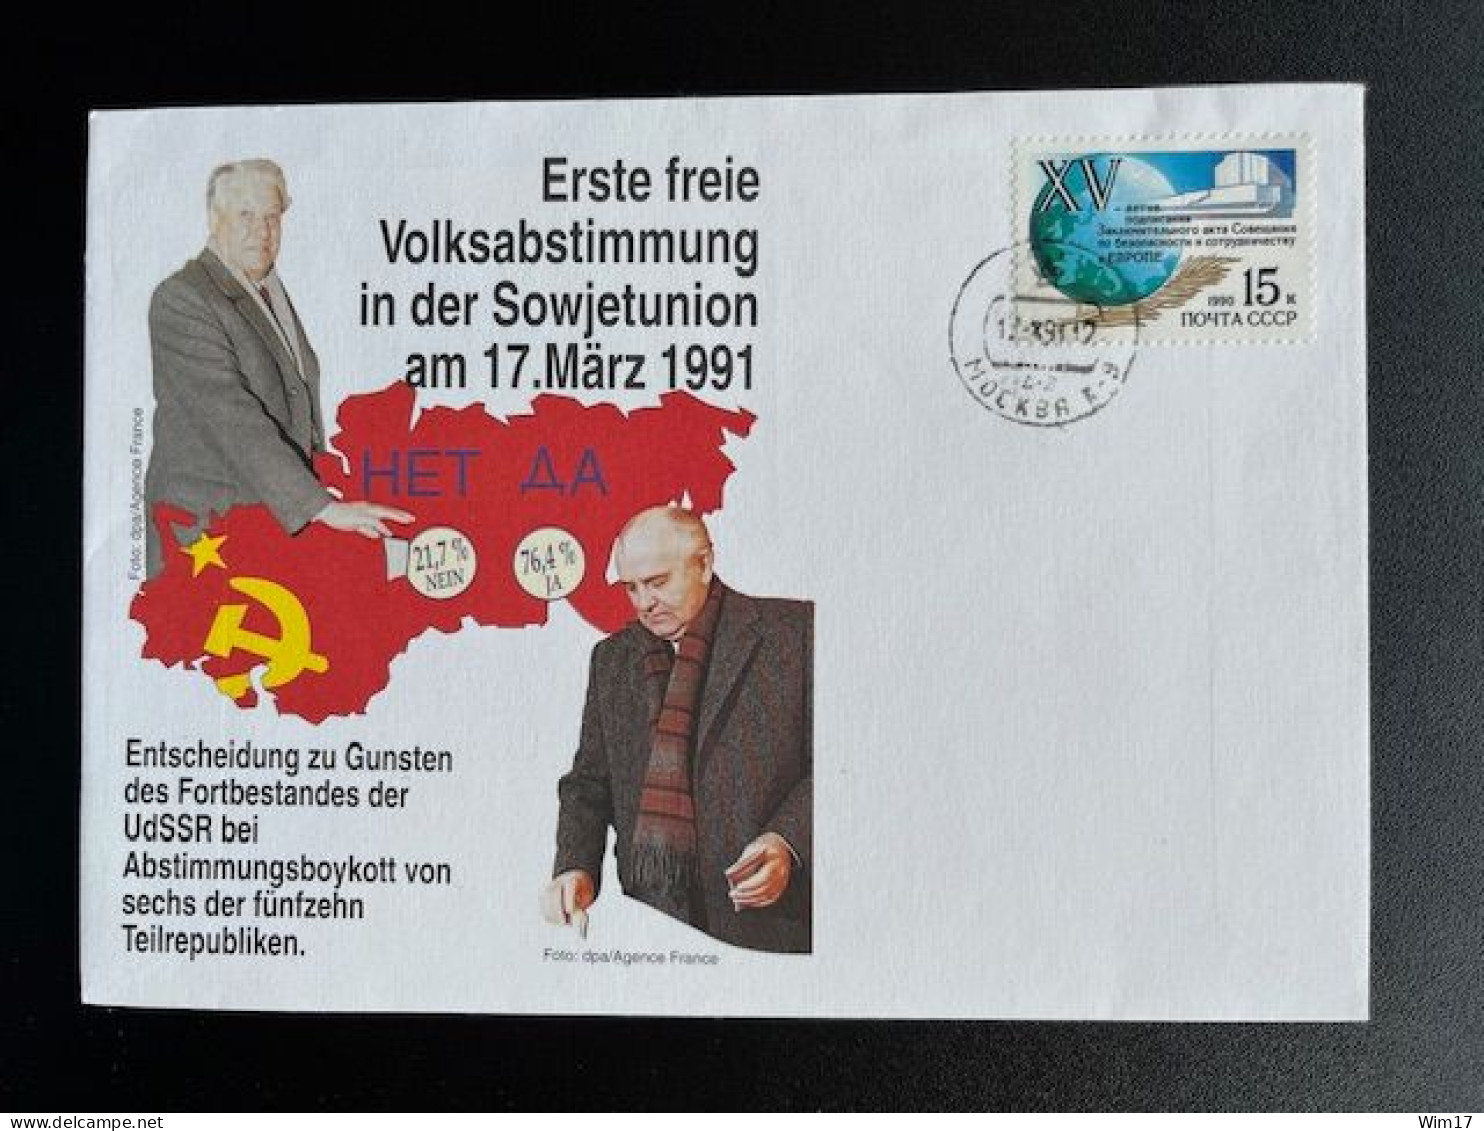 RUSSIA USSR 1991 SPECIAL COVER FIRST FREE ELECTIONS 17-03-1991 SOVJET UNIE CCCP SOVIET UNION - Covers & Documents